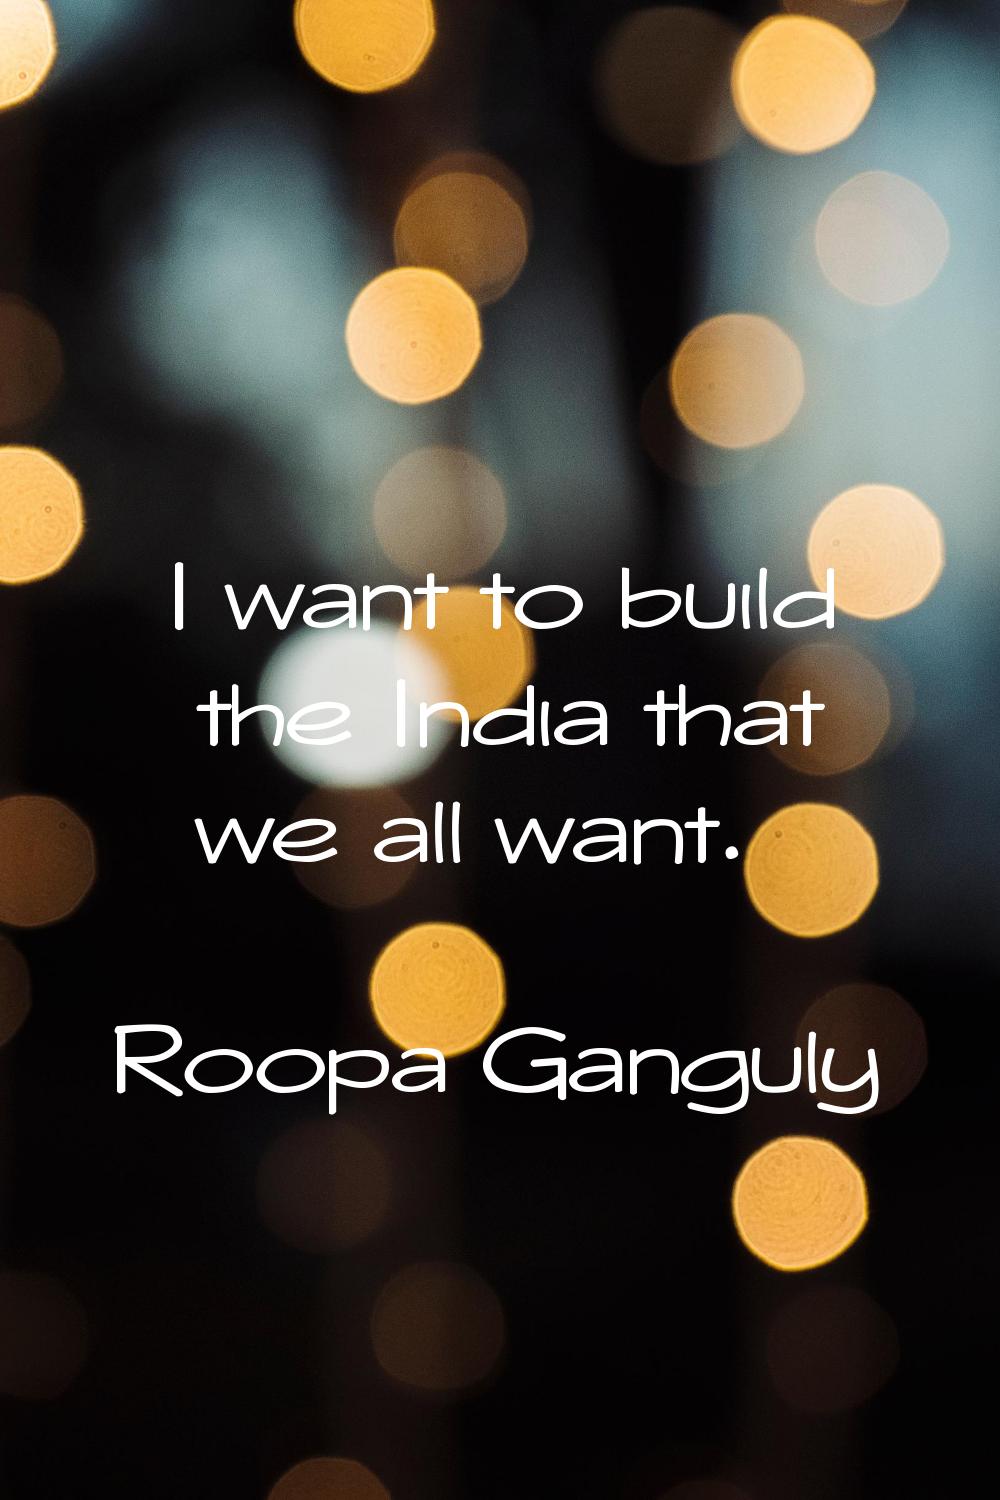 I want to build the India that we all want.